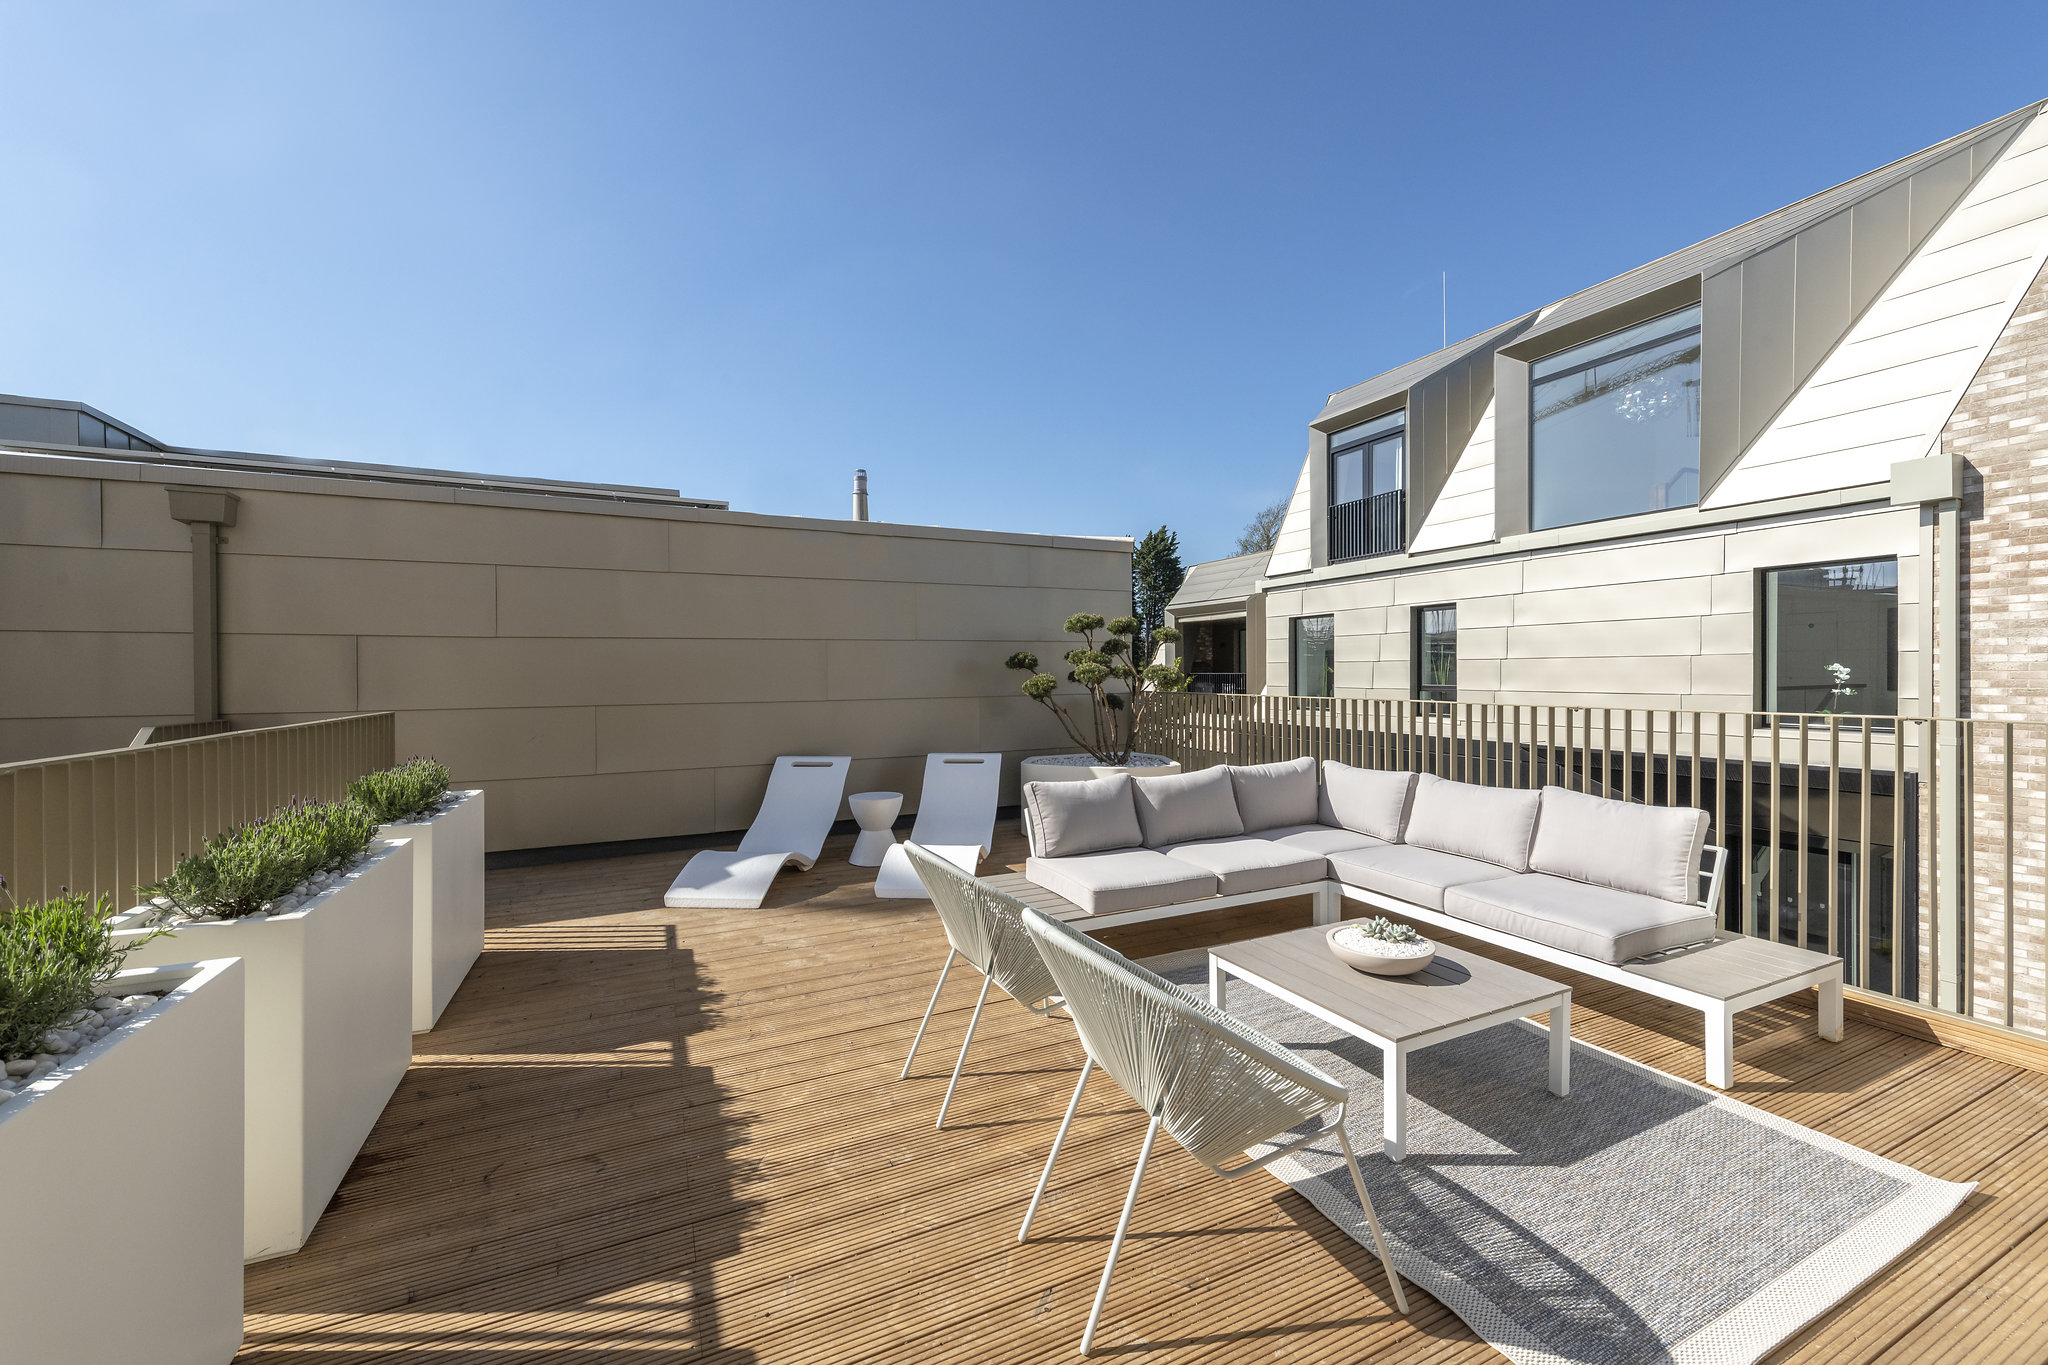 The Avenue - 4 bed show home - Terrace.jpg